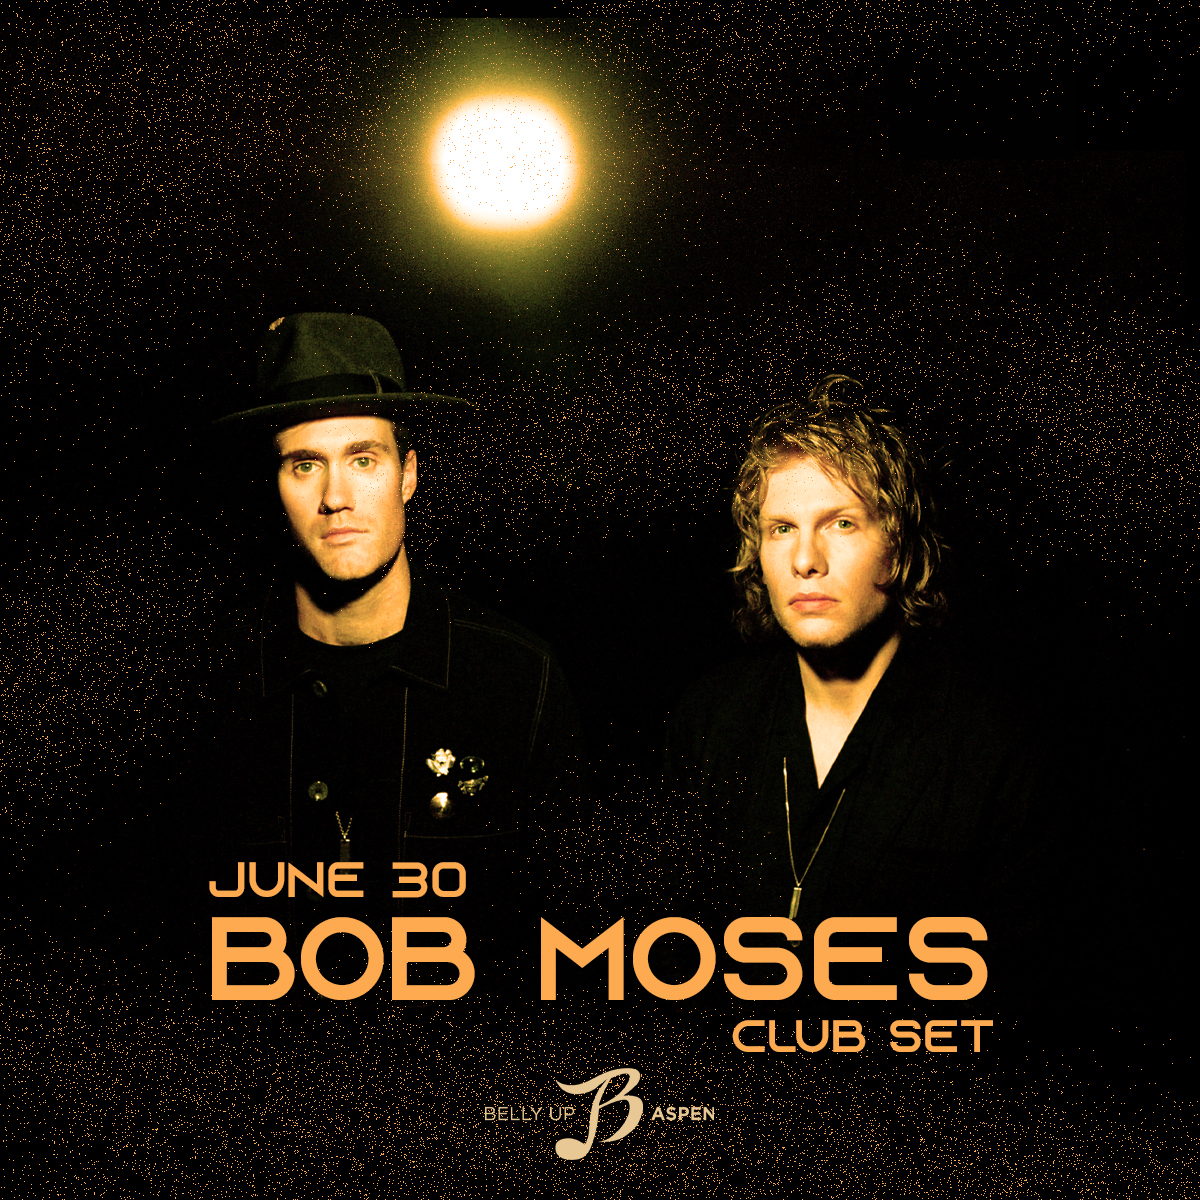 House music duo Bob Moses bring their club set 6/30! Presale starts Thu, 4/25 @ 10am MT. Sign up by 8:30am MT 4/25 to receive the presale code: bit.ly/3W7woV8